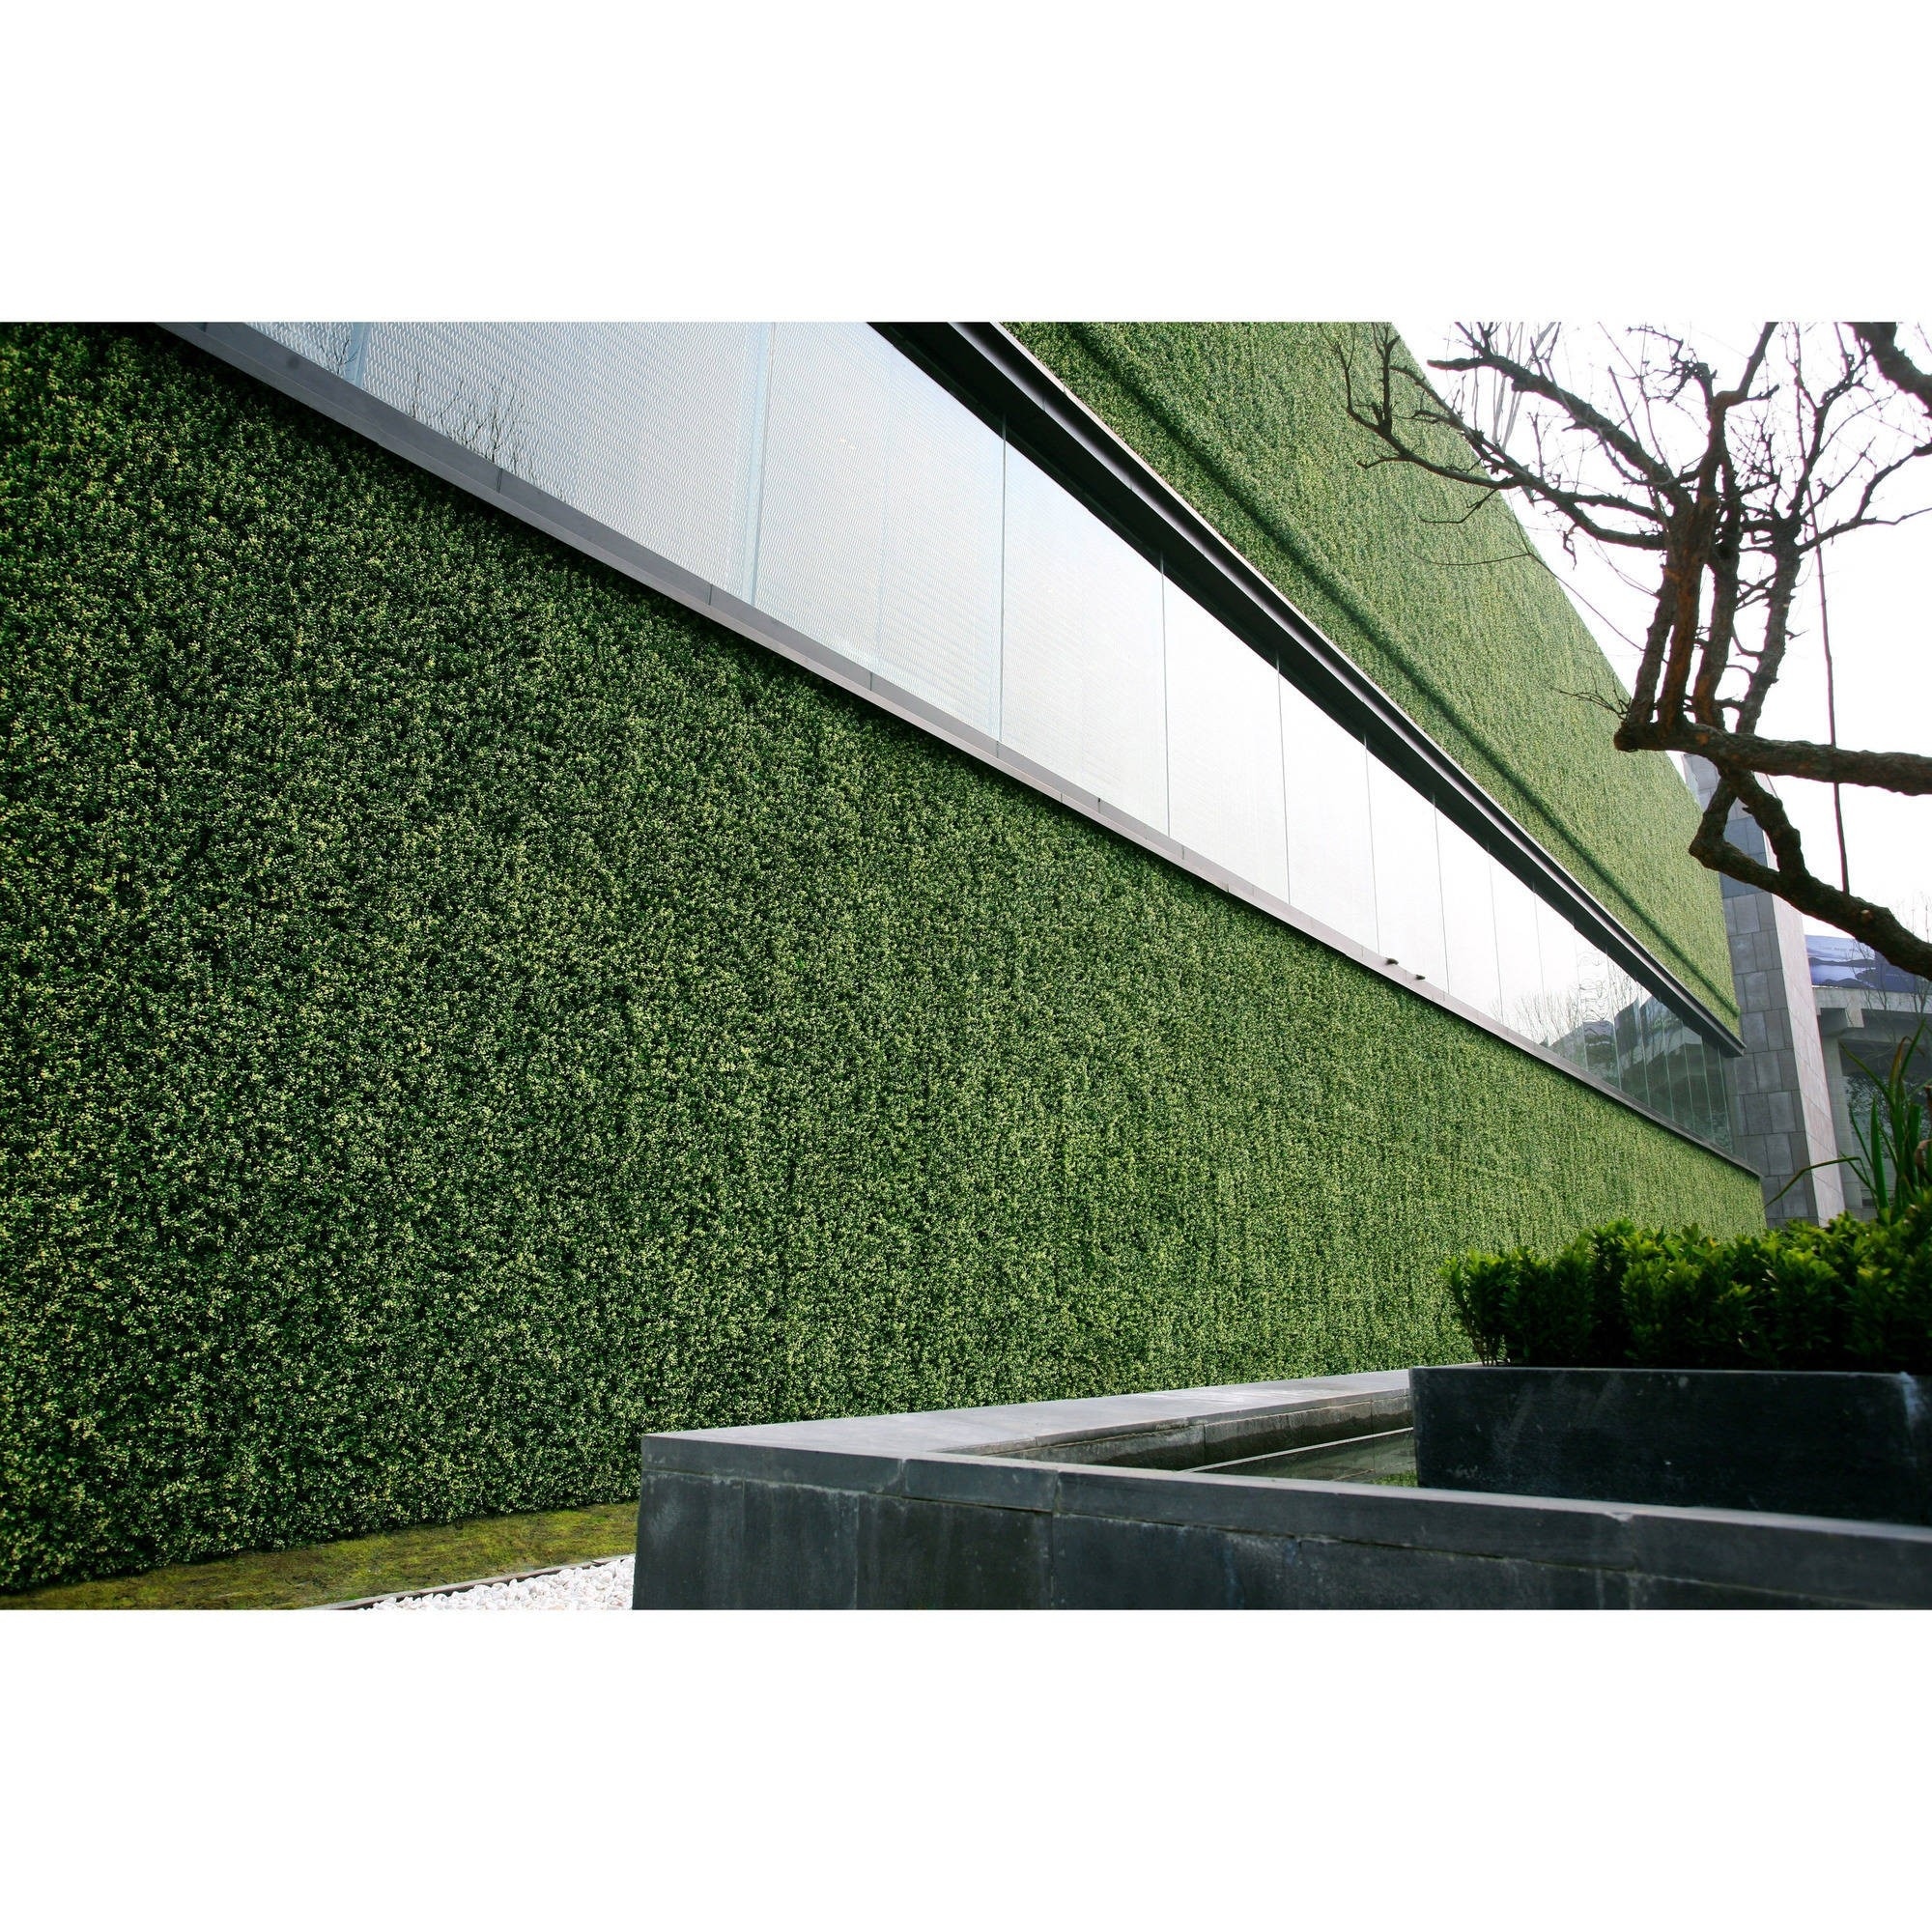 24 x 16 Inch Faux Boxwood Hedge Wall Panel as Greenery Backdrop Garden Fence Artificial Boxwood Panels UV Protected Boxwood Hedge Mat for Indoor Wall Decoration and Outdoor Balcony